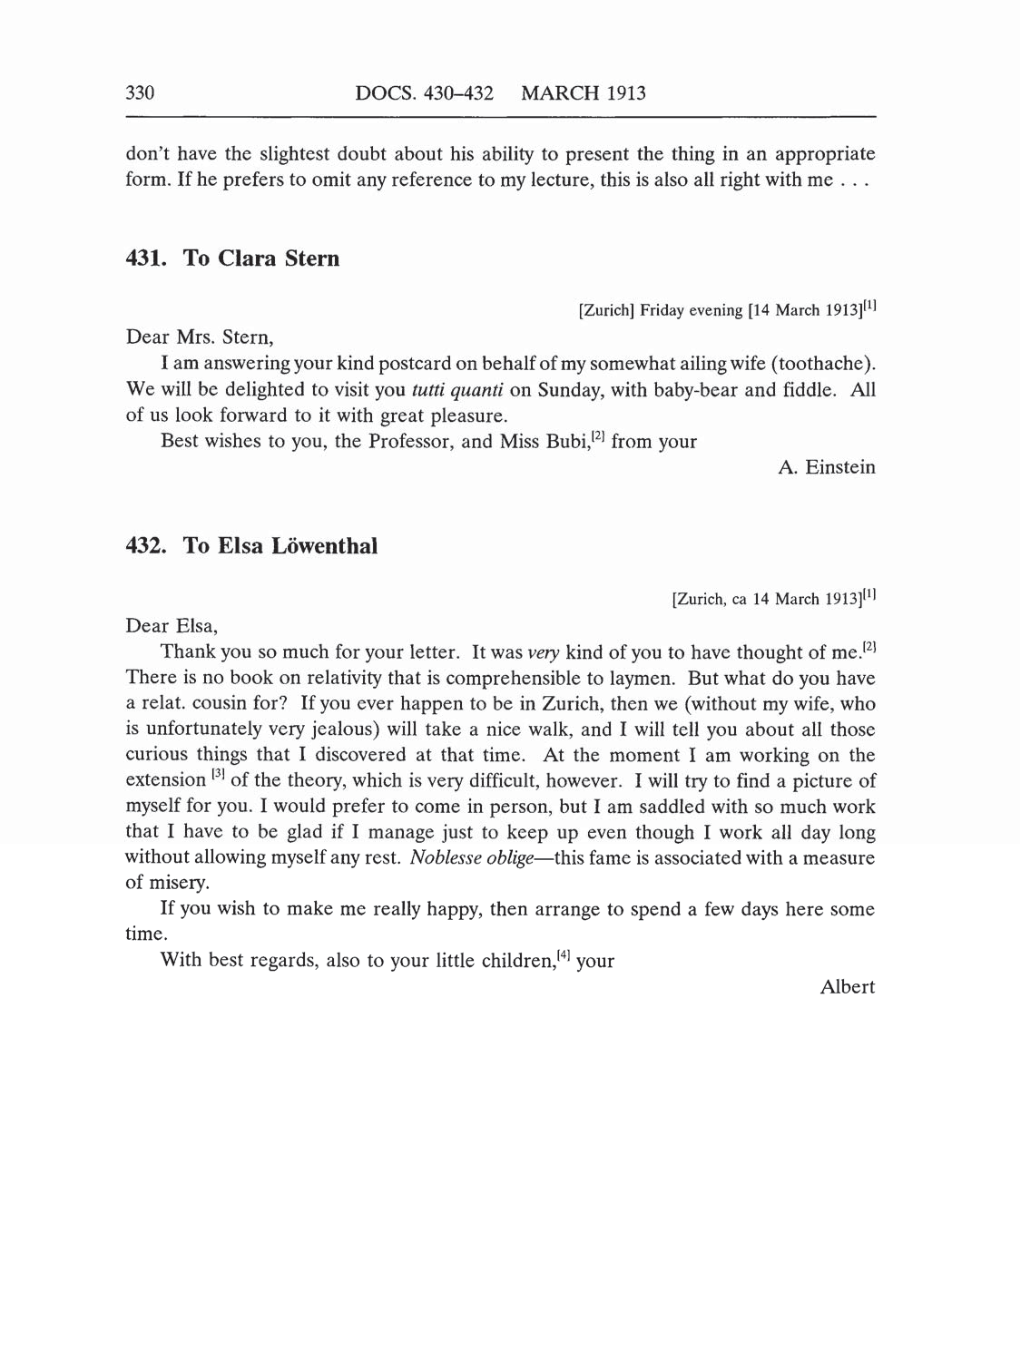 Volume 5: The Swiss Years: Correspondence, 1902-1914 (English translation supplement) page 330